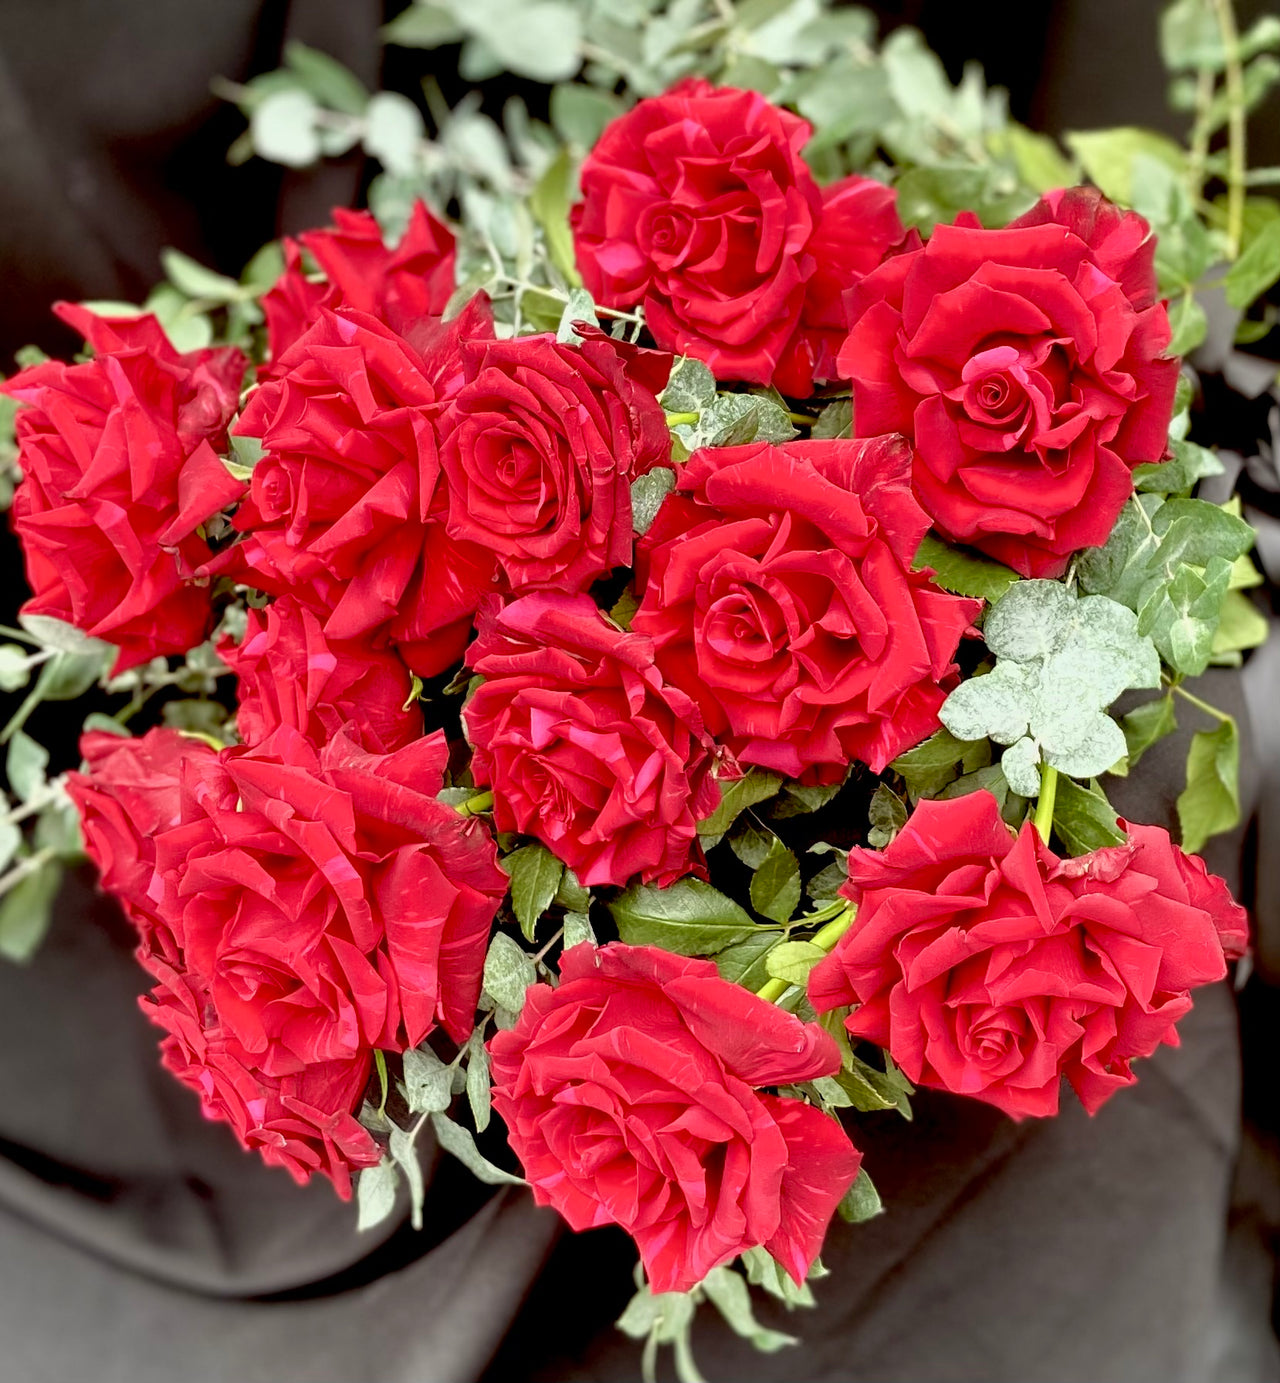 Valentine's Day Red Rose Bouquet - Long stemmed red roses - Classic Rose Bouquet - Haven Botanical